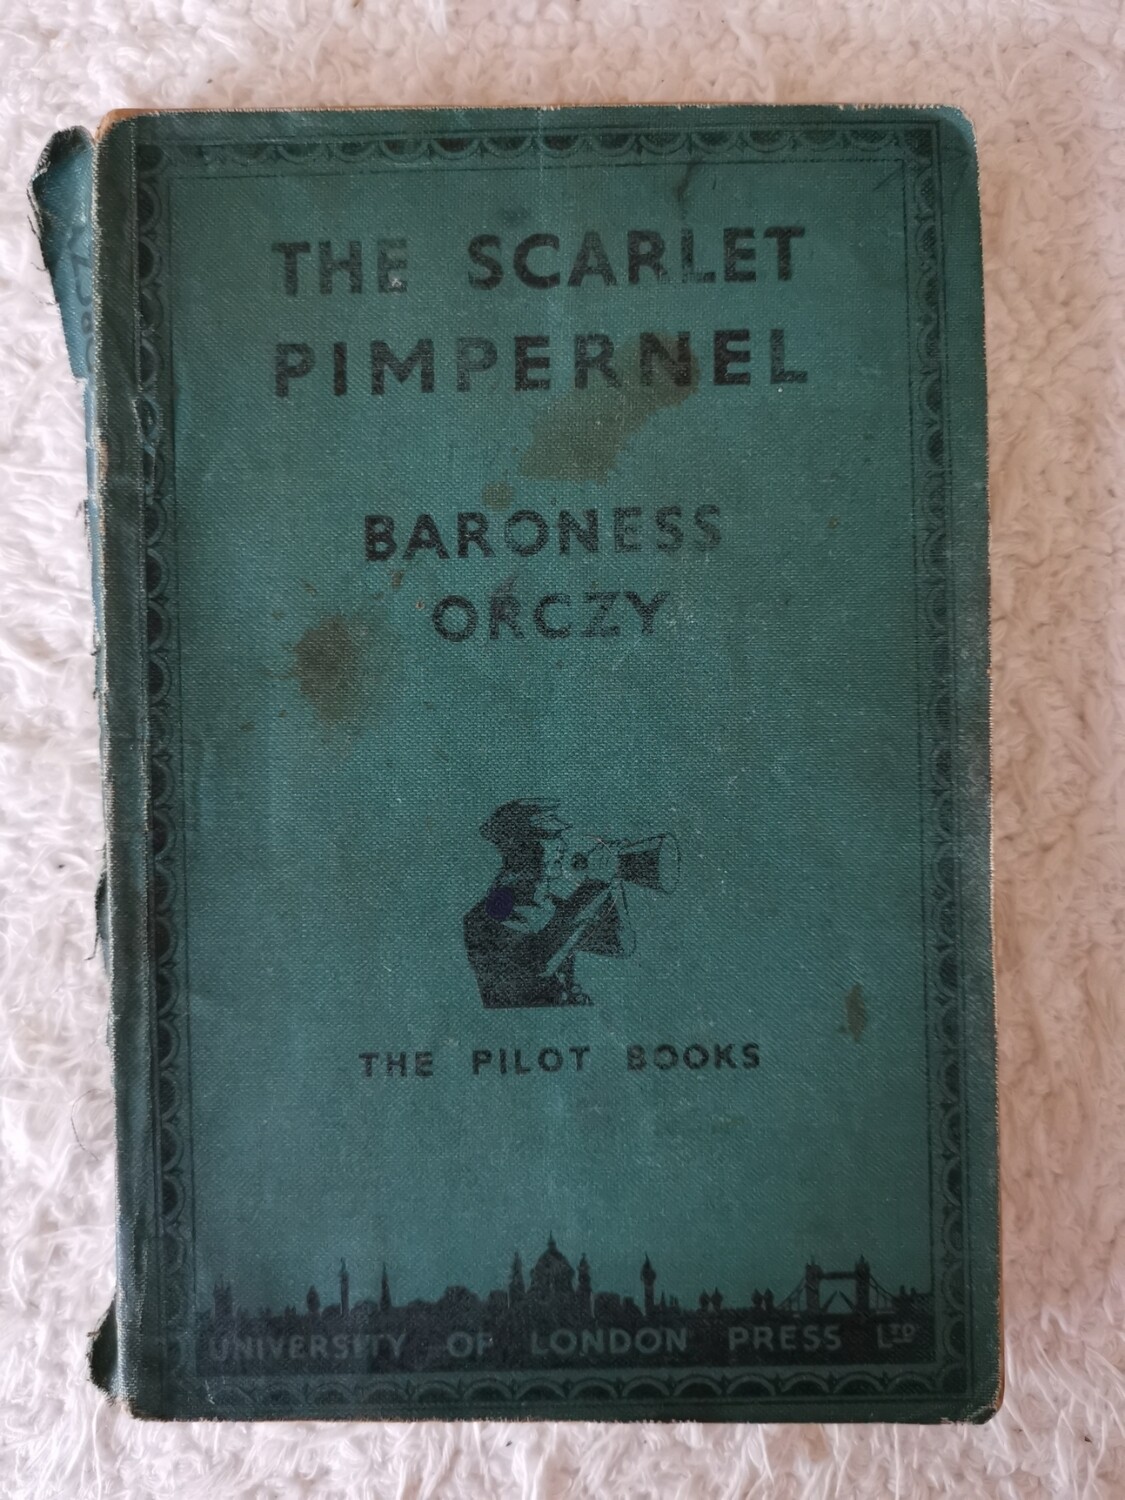 The scarlet pimpernel, Baroness Orczy